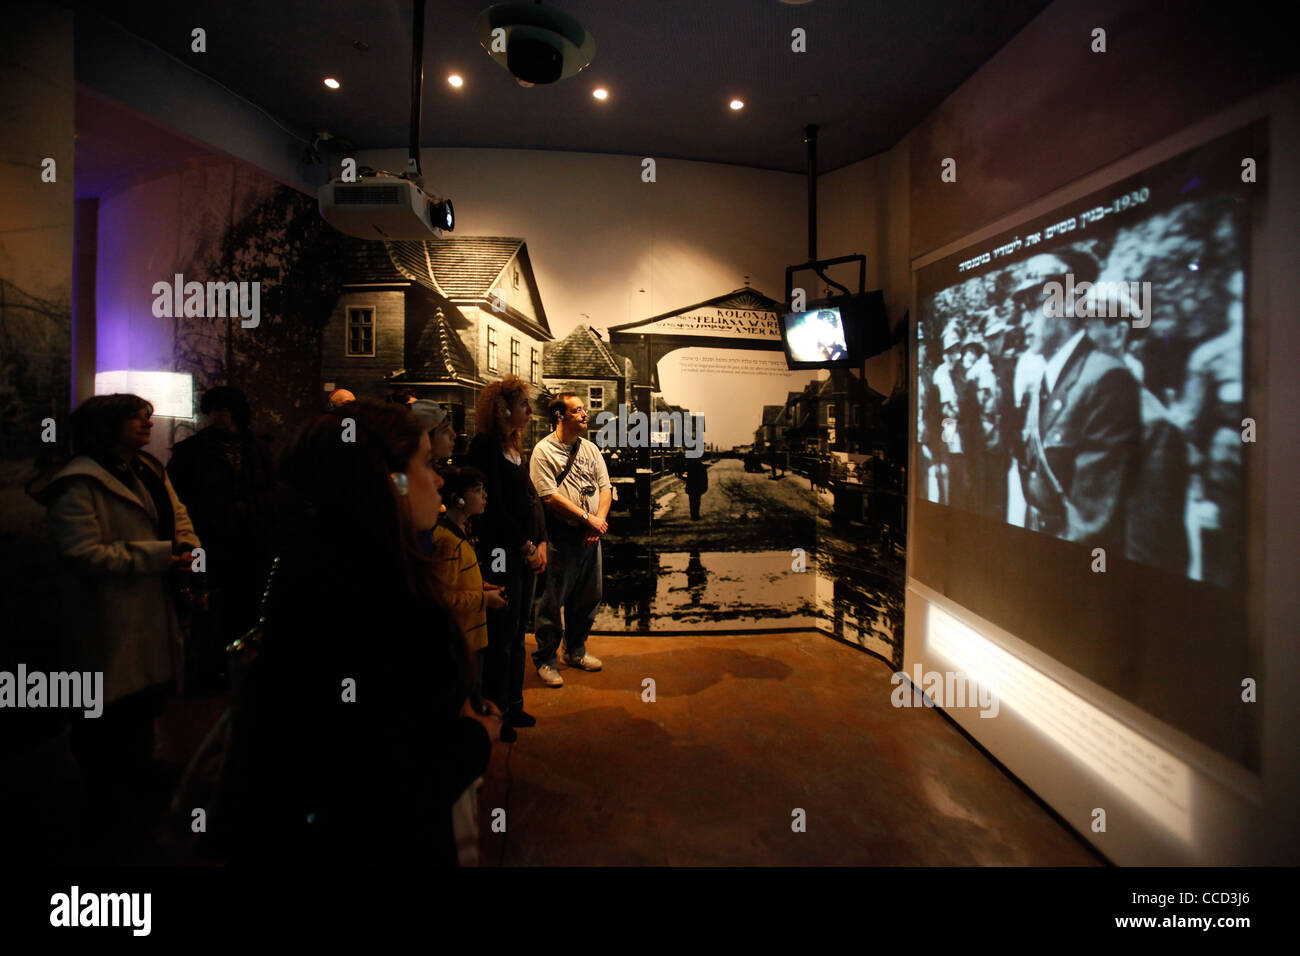 Visitors watching an audio-visual display at Menachem Begin Heritage Center the official state memorial commemorating Menachem Begin, Israel’s sixth Prime Minister located on the Hinnom Ridge, in Jerusalem Israel Stock Photo